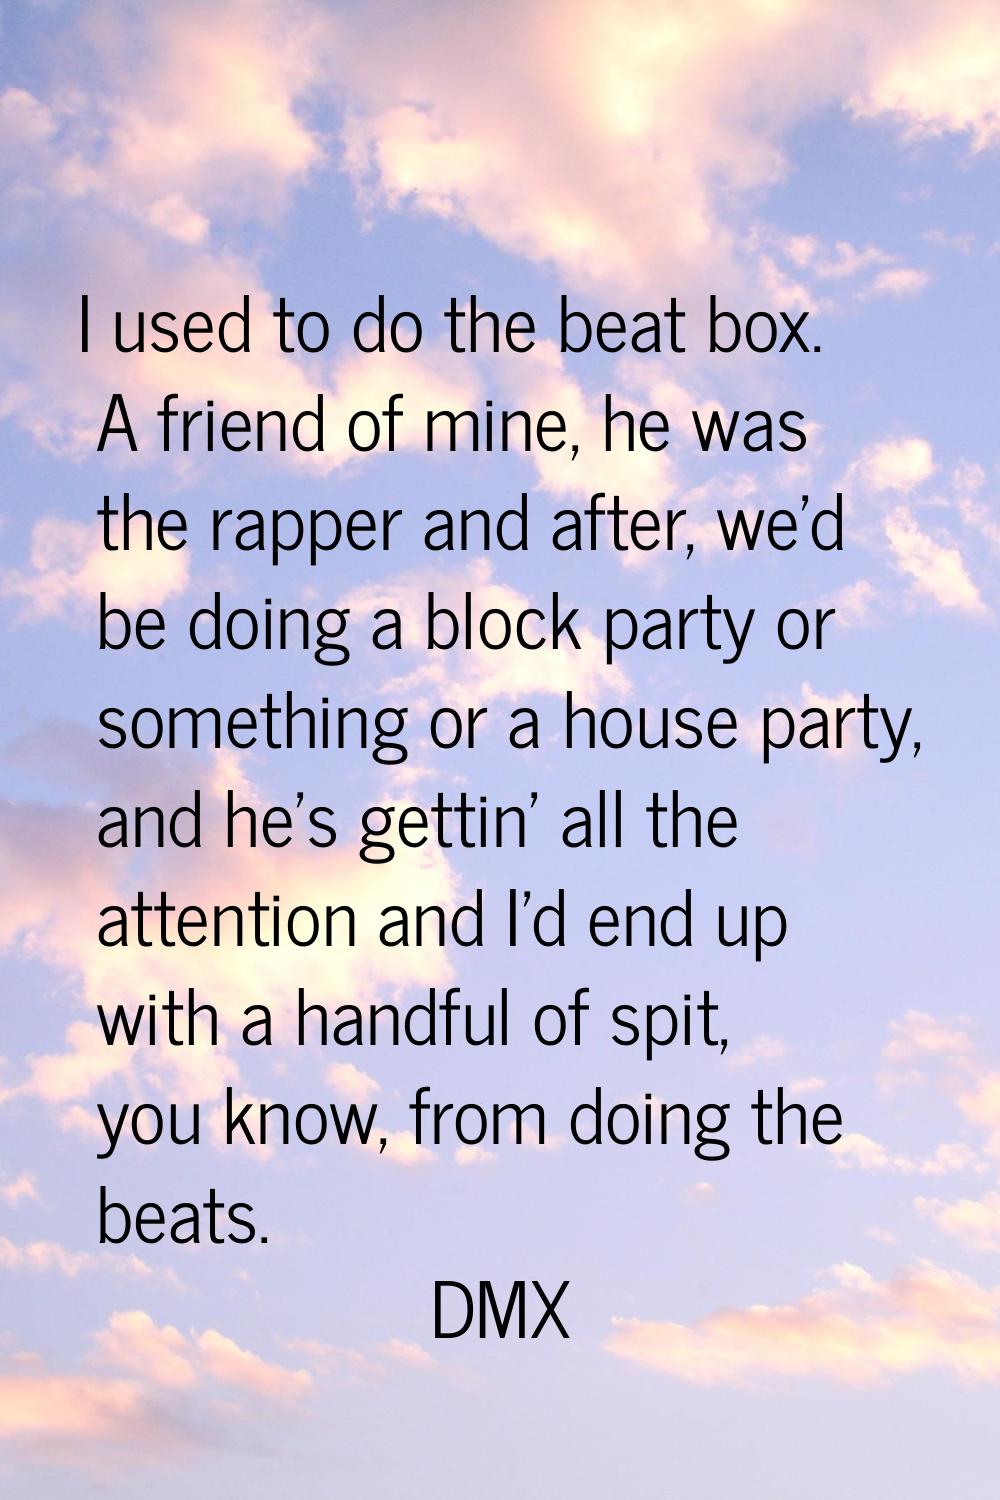 I used to do the beat box. A friend of mine, he was the rapper and after, we'd be doing a block par